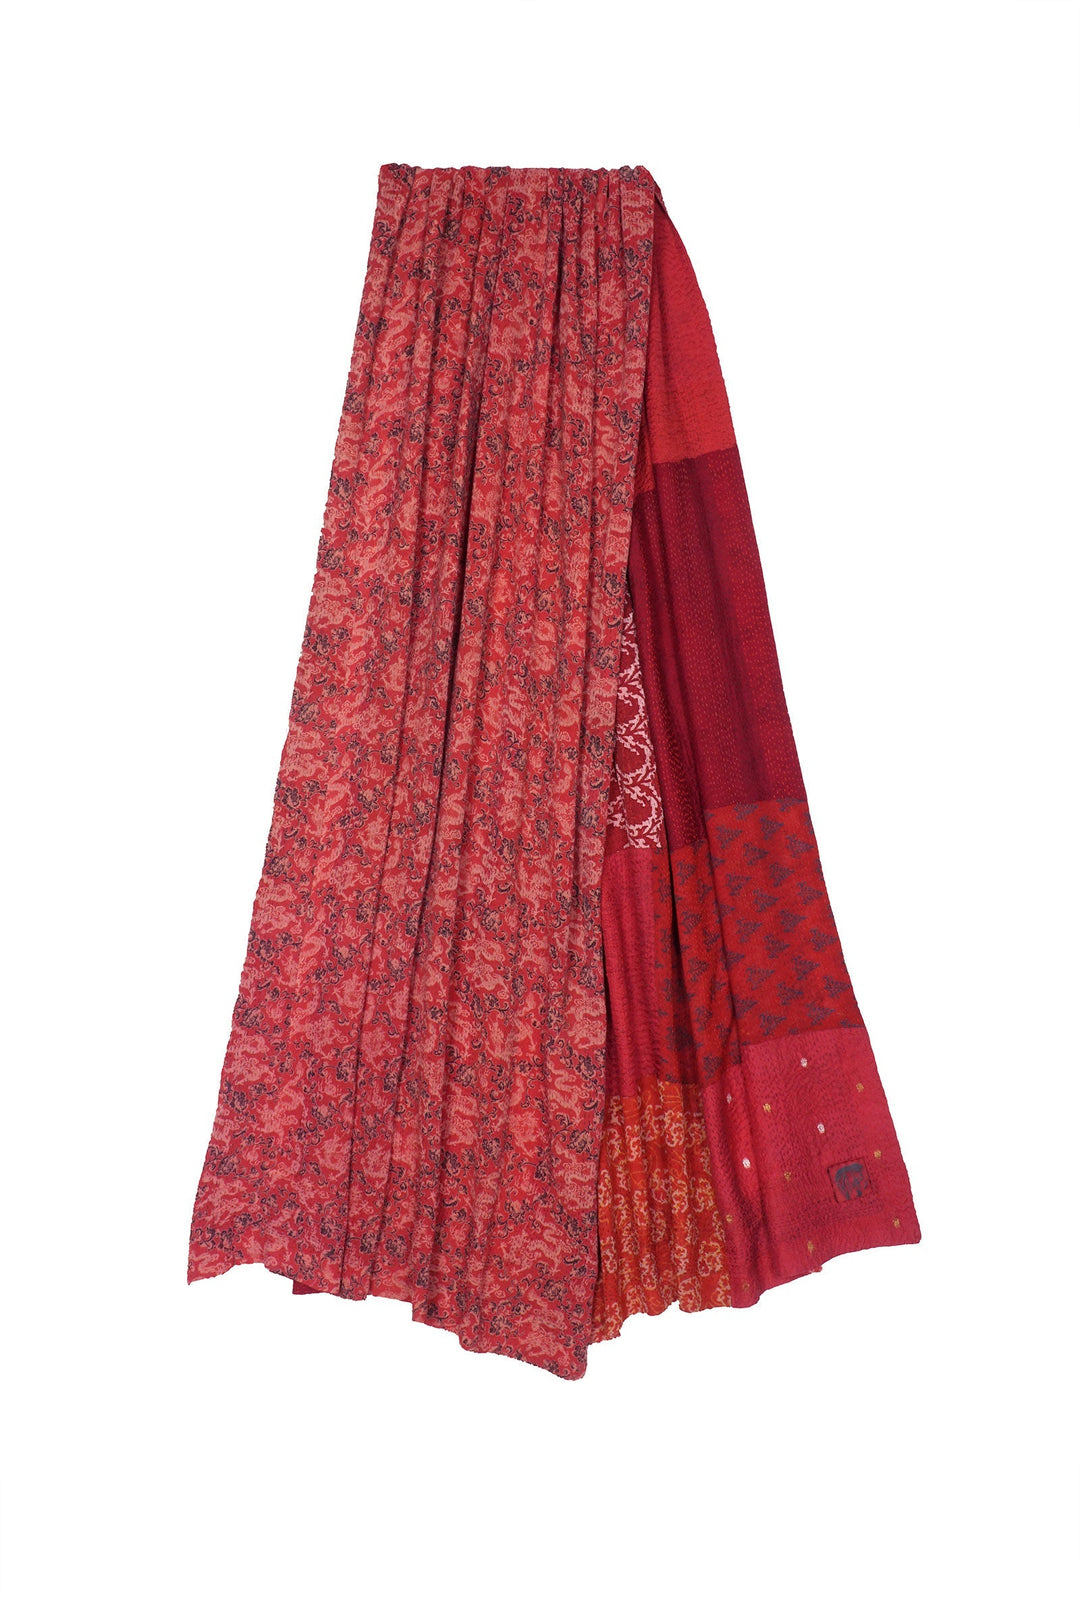 GEORGETTE VINTAGE SILK PATCH KANTHA SHAWL LARGE - gs2803-red -